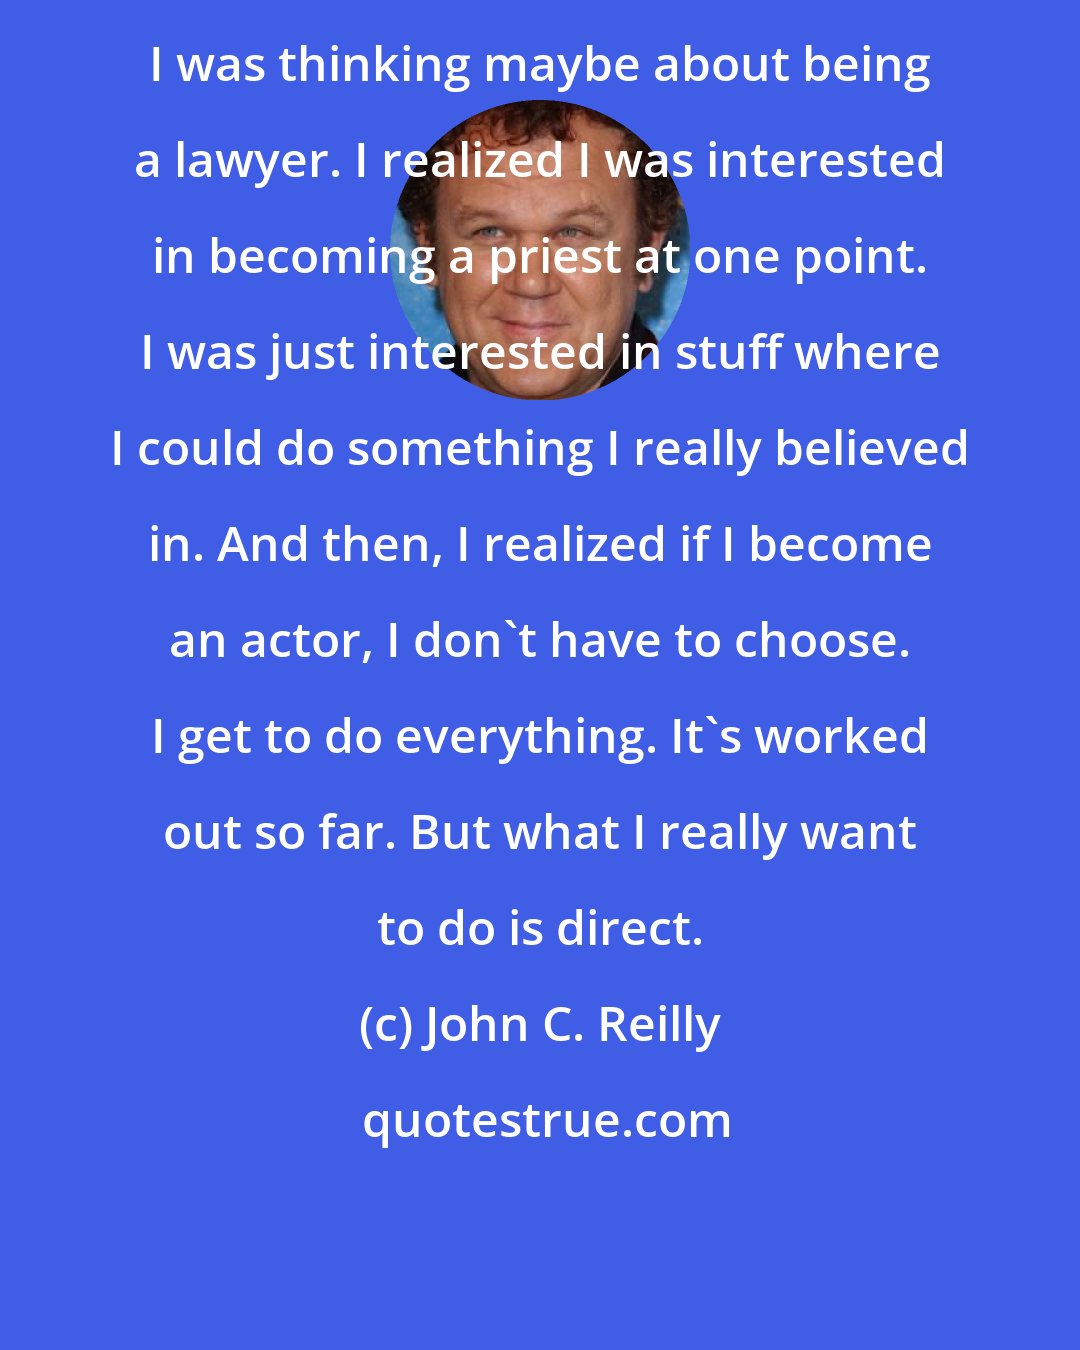 John C. Reilly: I was thinking maybe about being a lawyer. I realized I was interested in becoming a priest at one point. I was just interested in stuff where I could do something I really believed in. And then, I realized if I become an actor, I don't have to choose. I get to do everything. It's worked out so far. But what I really want to do is direct.